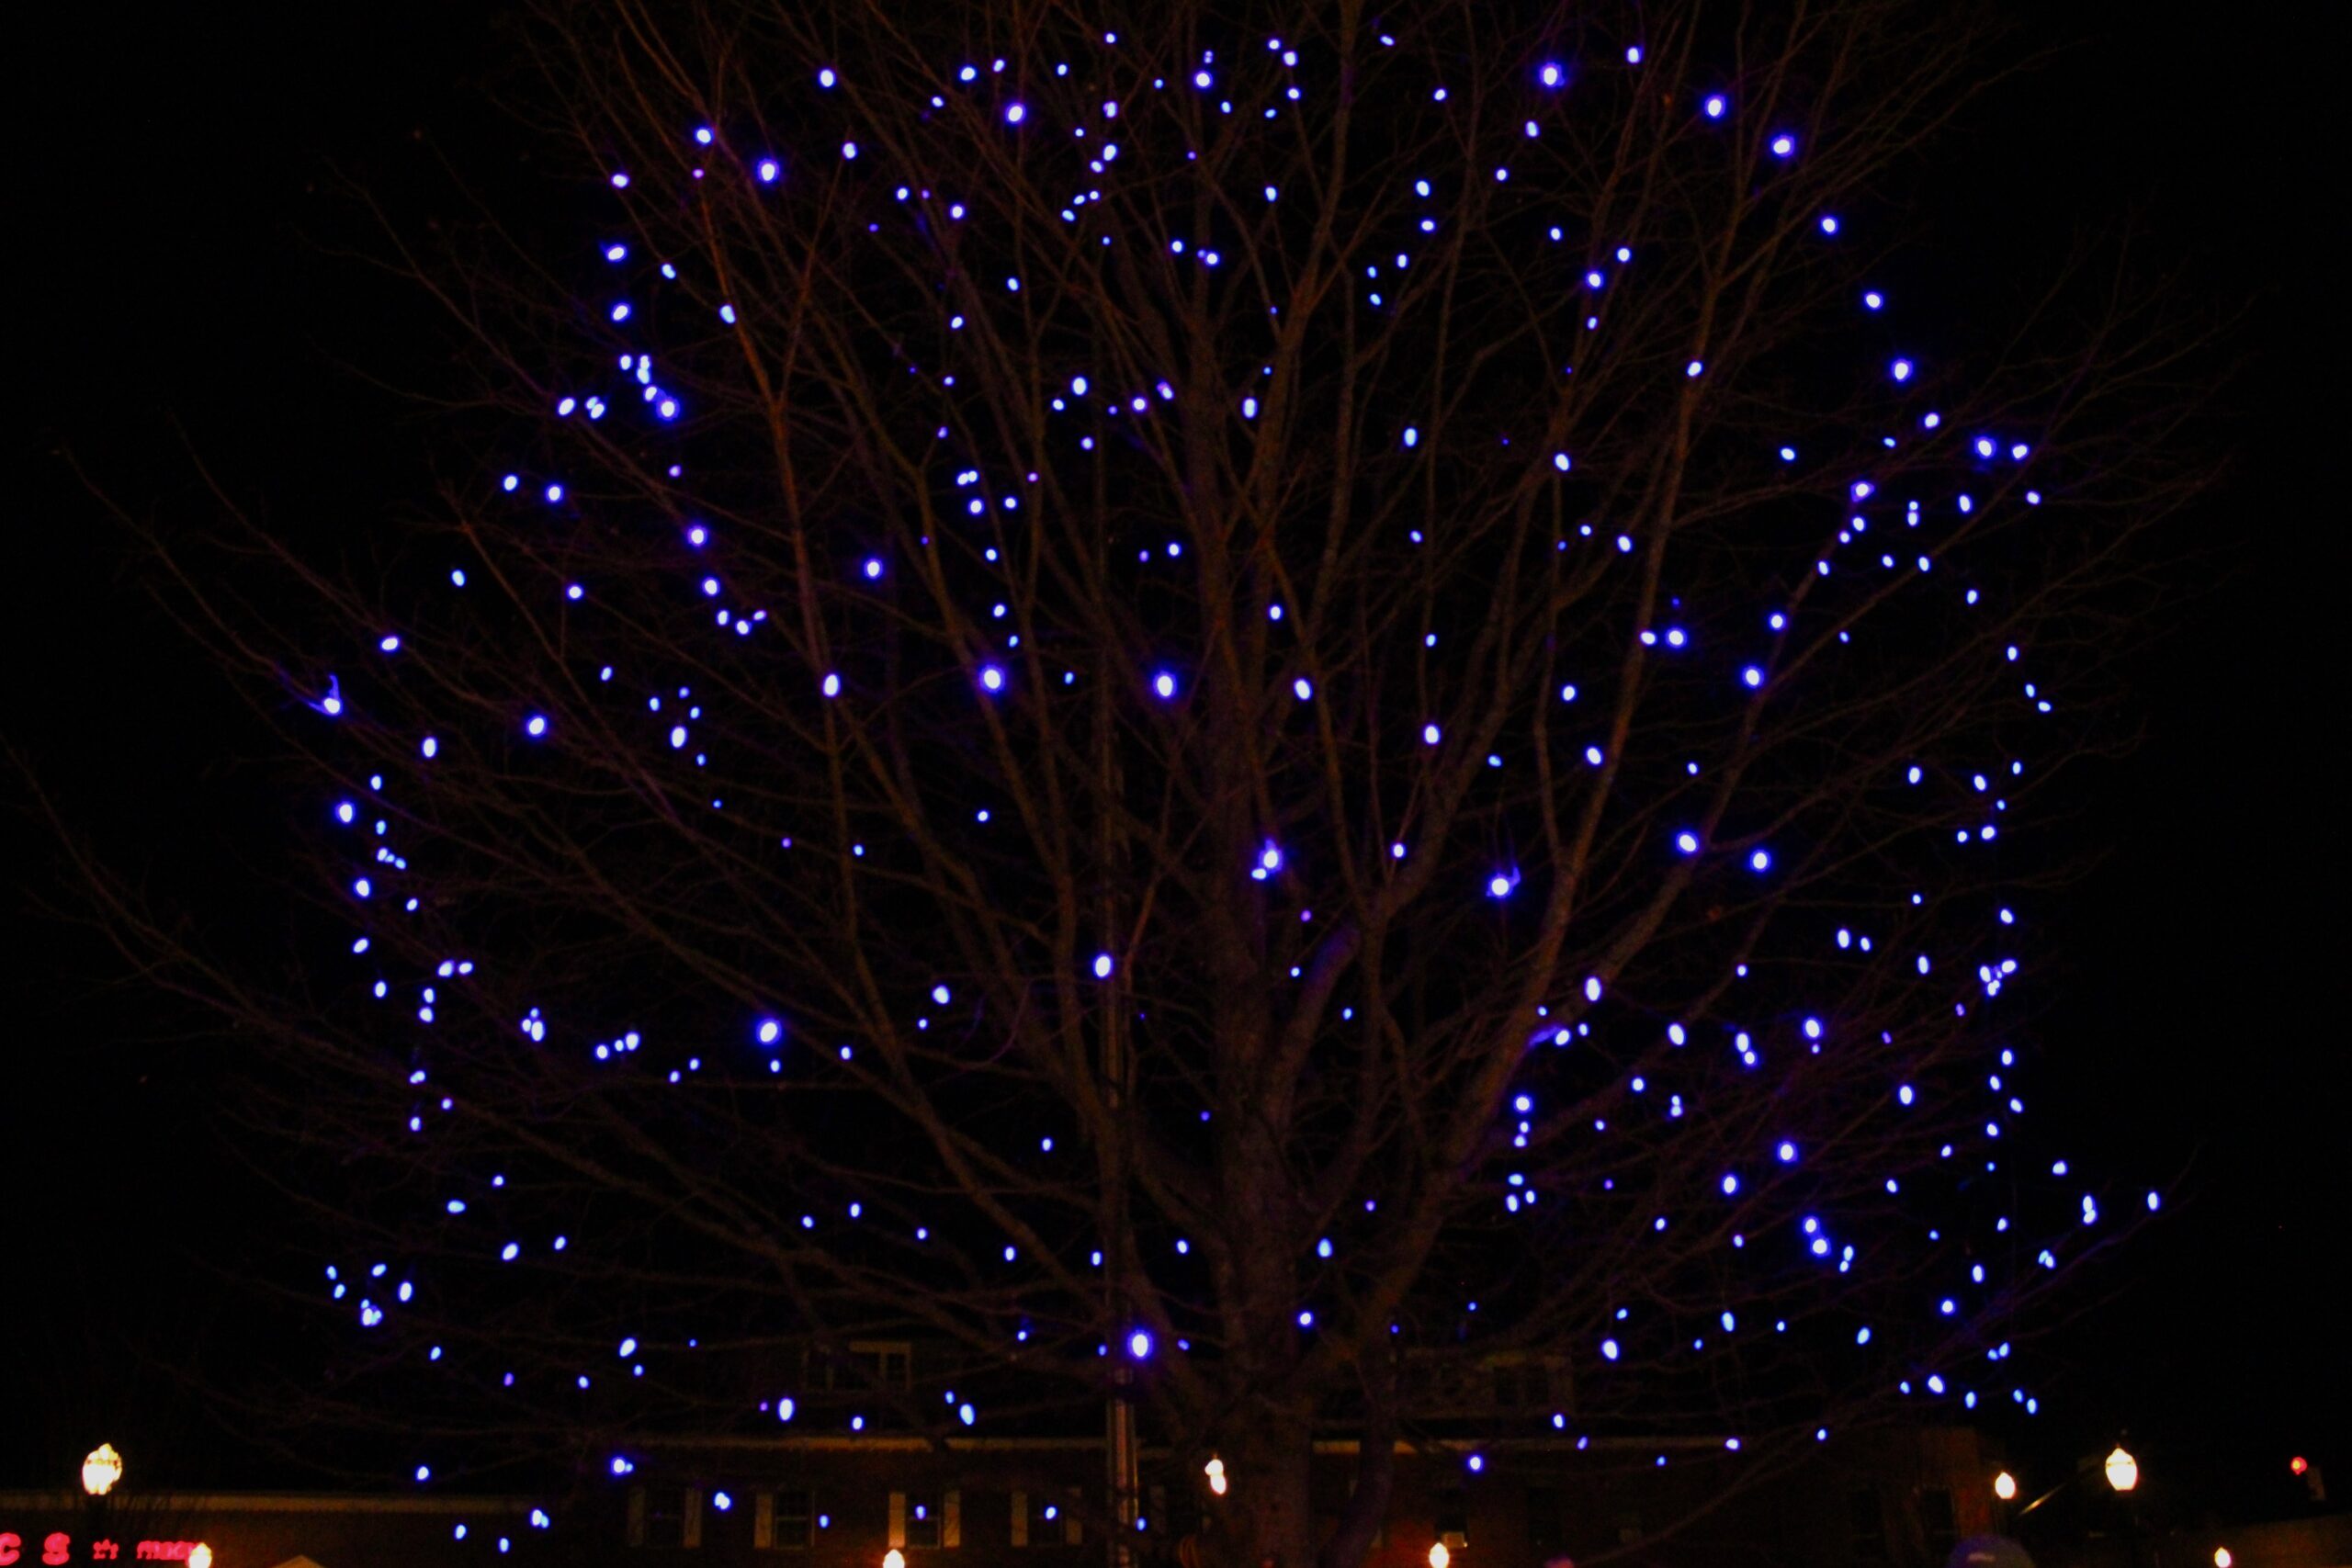 Needhamites ‘Shine a Positive Light’ with Annual Blue Tree Lighting